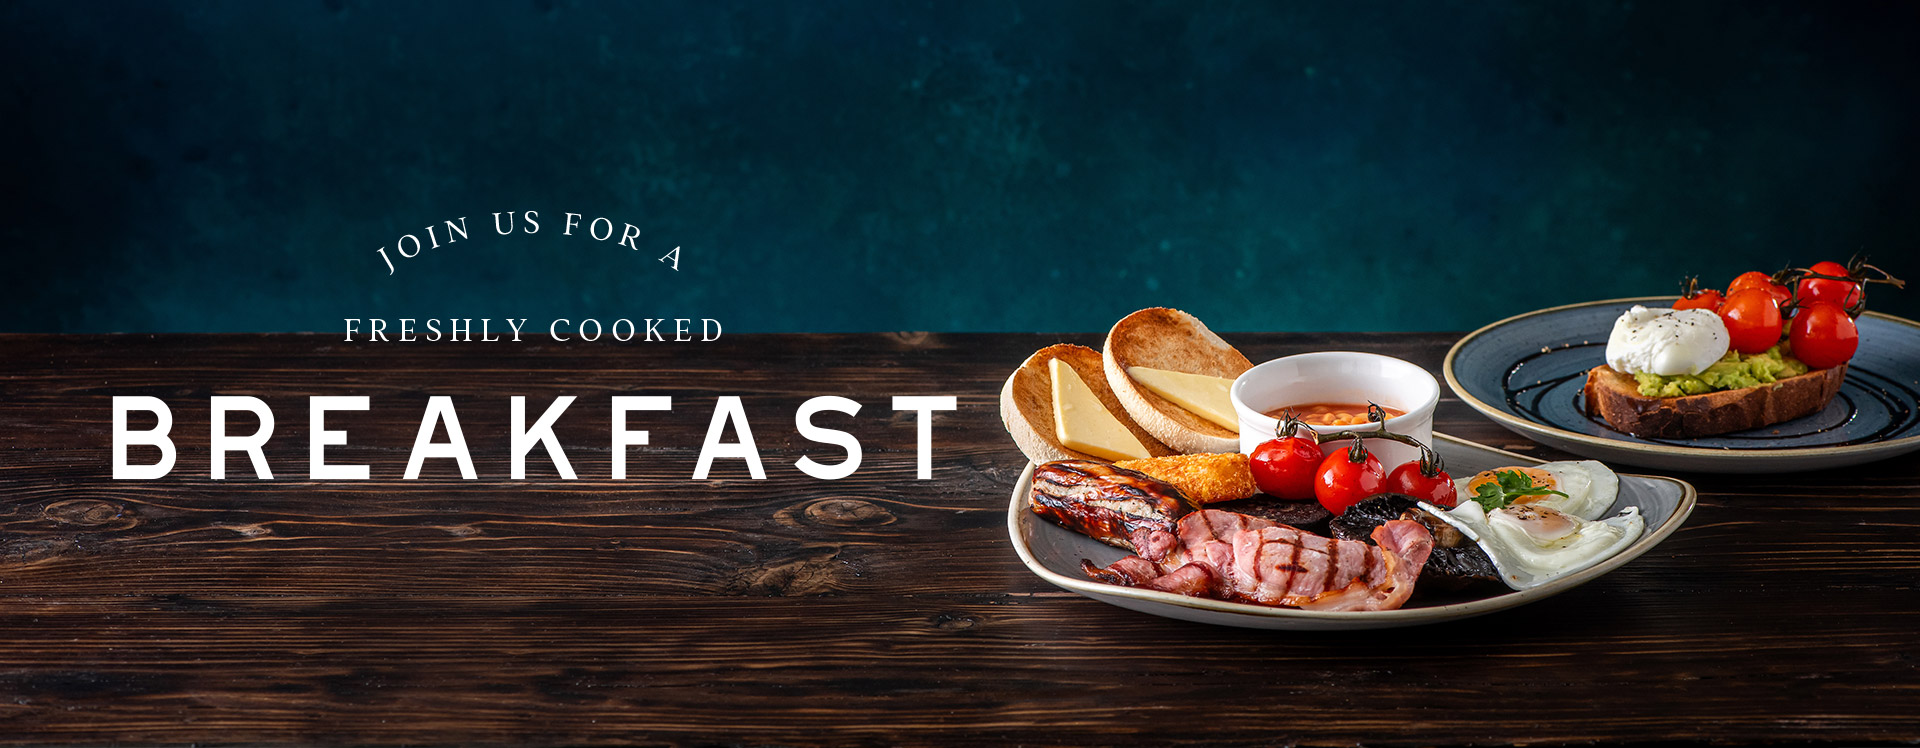 Breakfast at Haymarket - Book a table